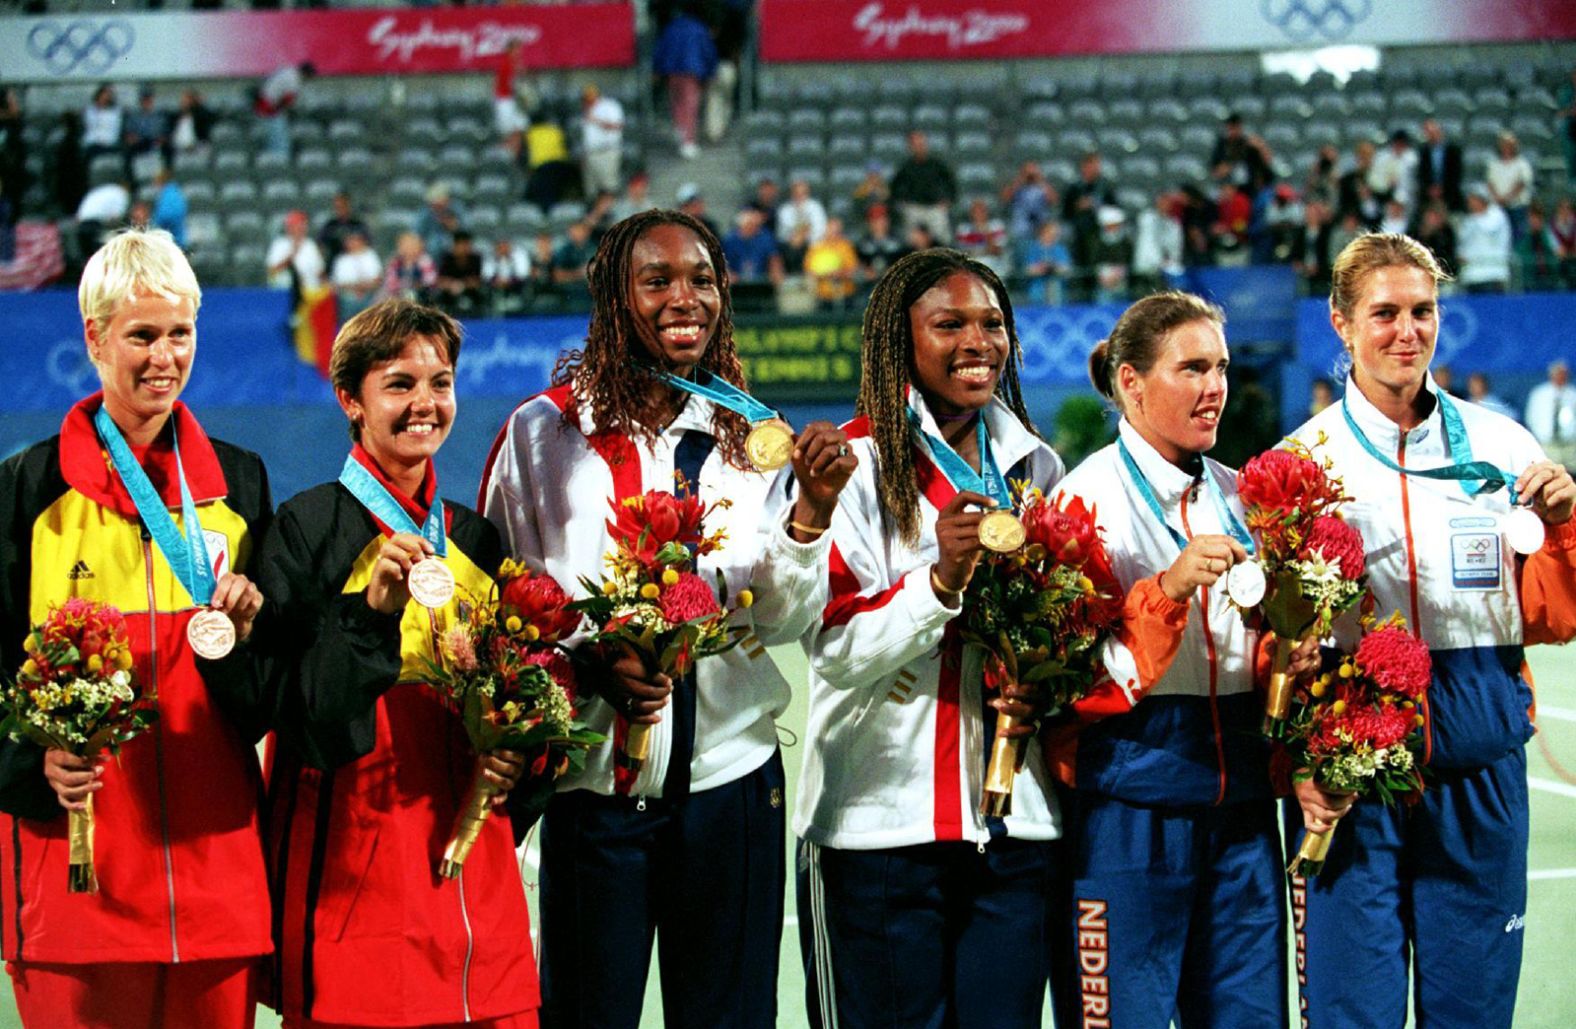 The sisters teamed up in doubles to win Olympic gold at the Sydney Olympics in 2000. They would also win doubles gold at the 2008 and 2012 Olympics.